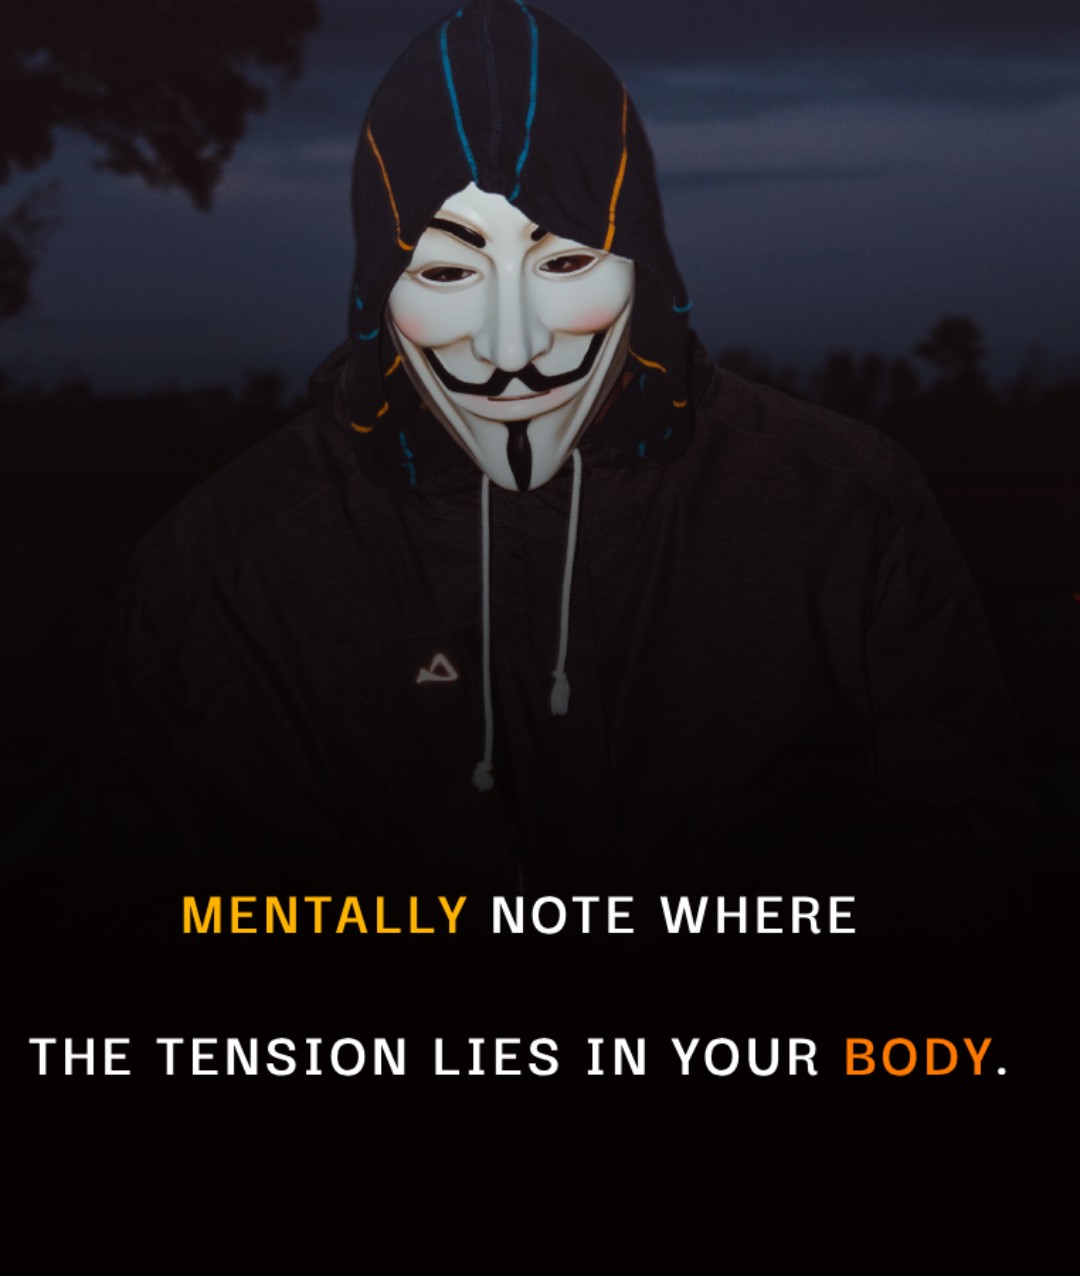 Mentally note where the tension lies in your body. - emotional status 